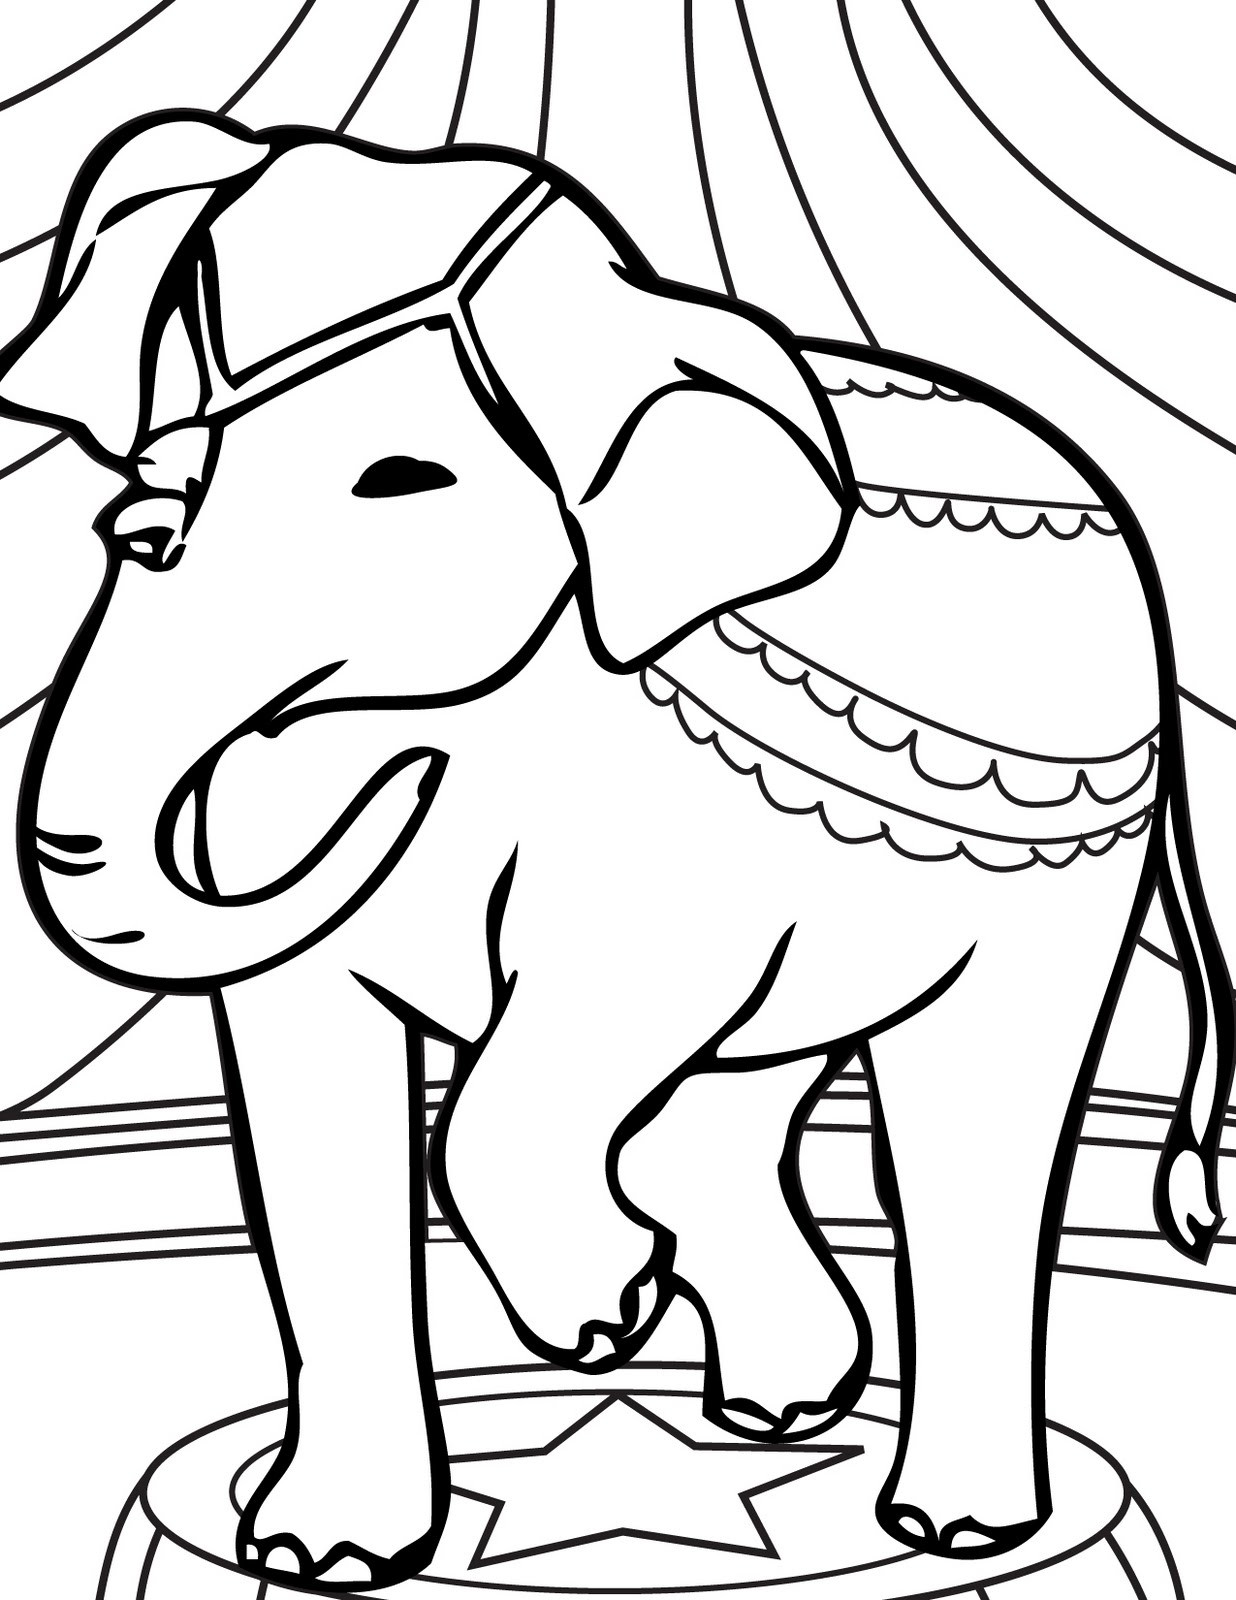 Coloring Sheet For Kids
 transmissionpress Circus Elephant Coloring Pages